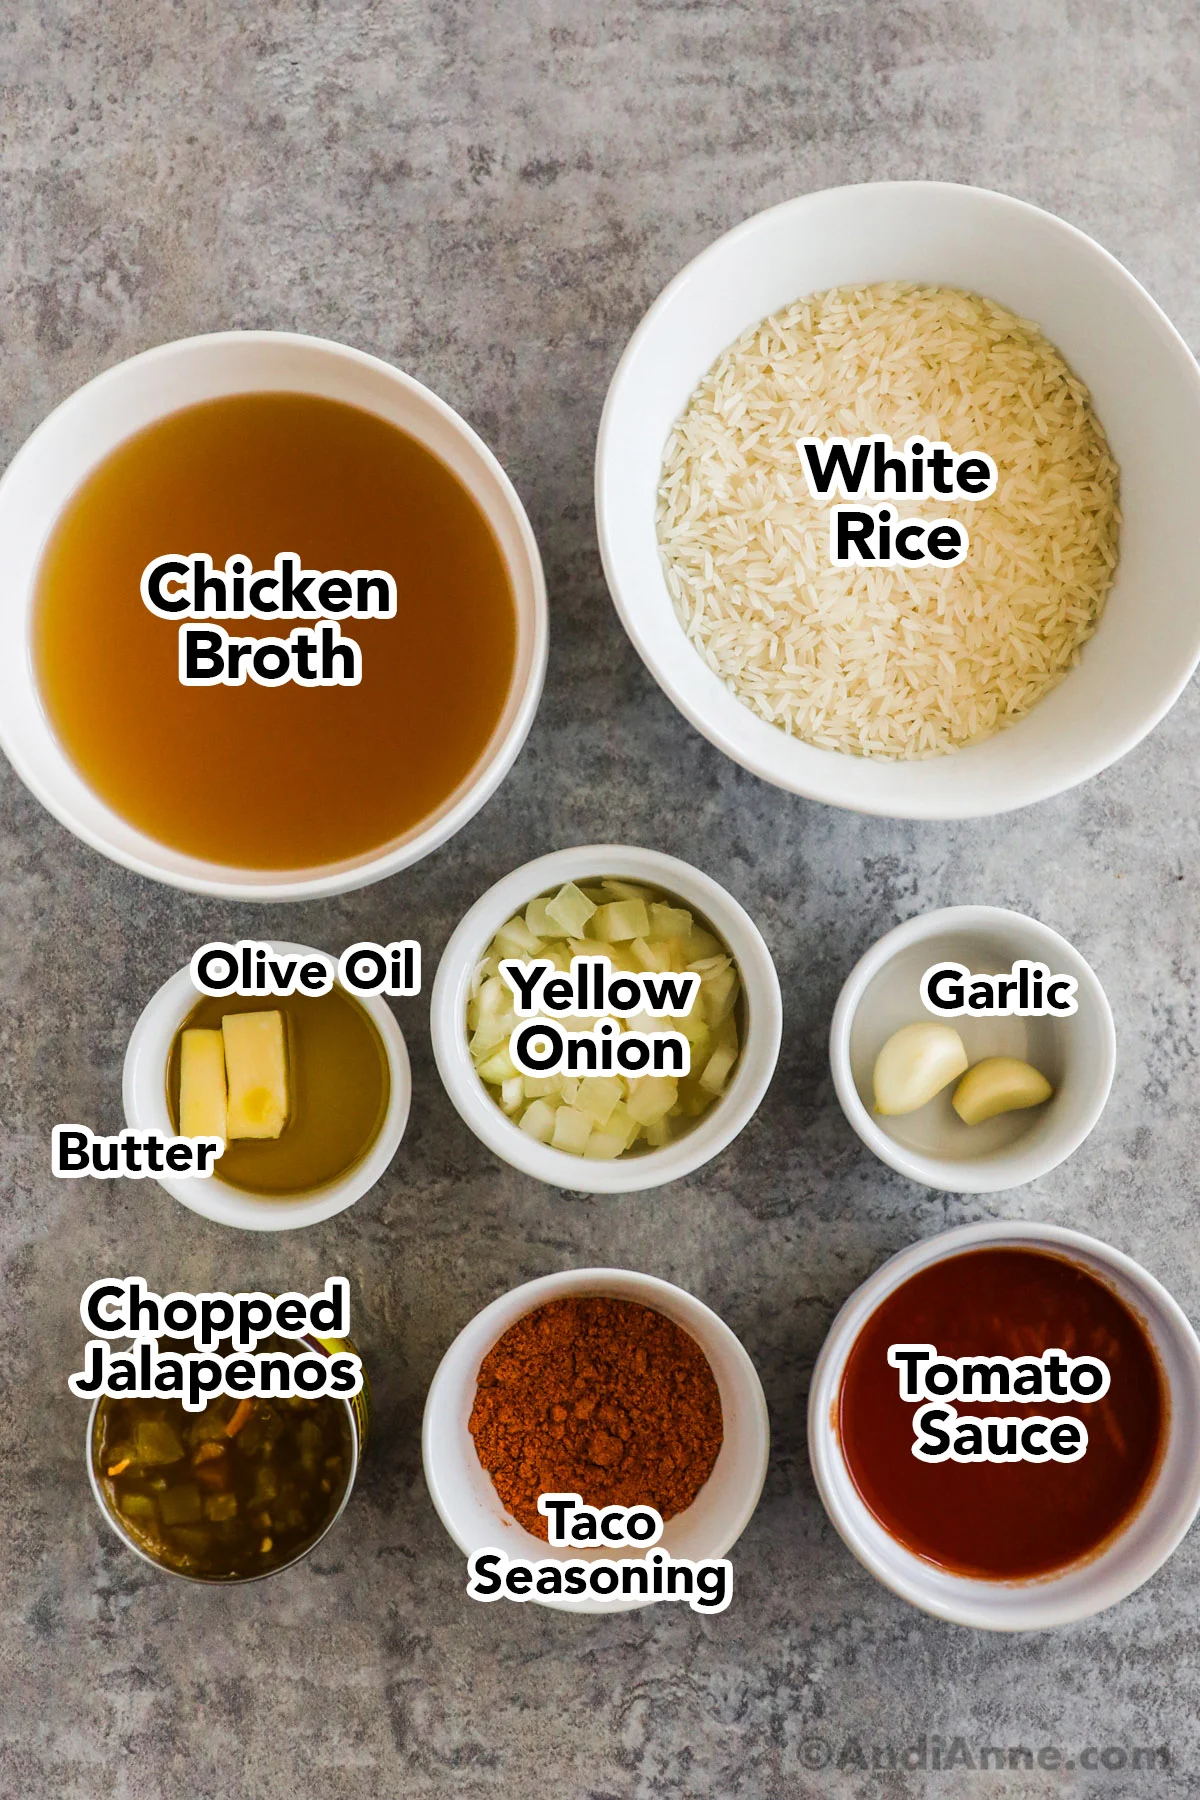 Recipe ingredients including bowls of chicken broth, jasmine rice, olive oil and butter, yellow onion, garlic cloves, canned chopped jalapenos, taco seasoning spice and tomato sauce.